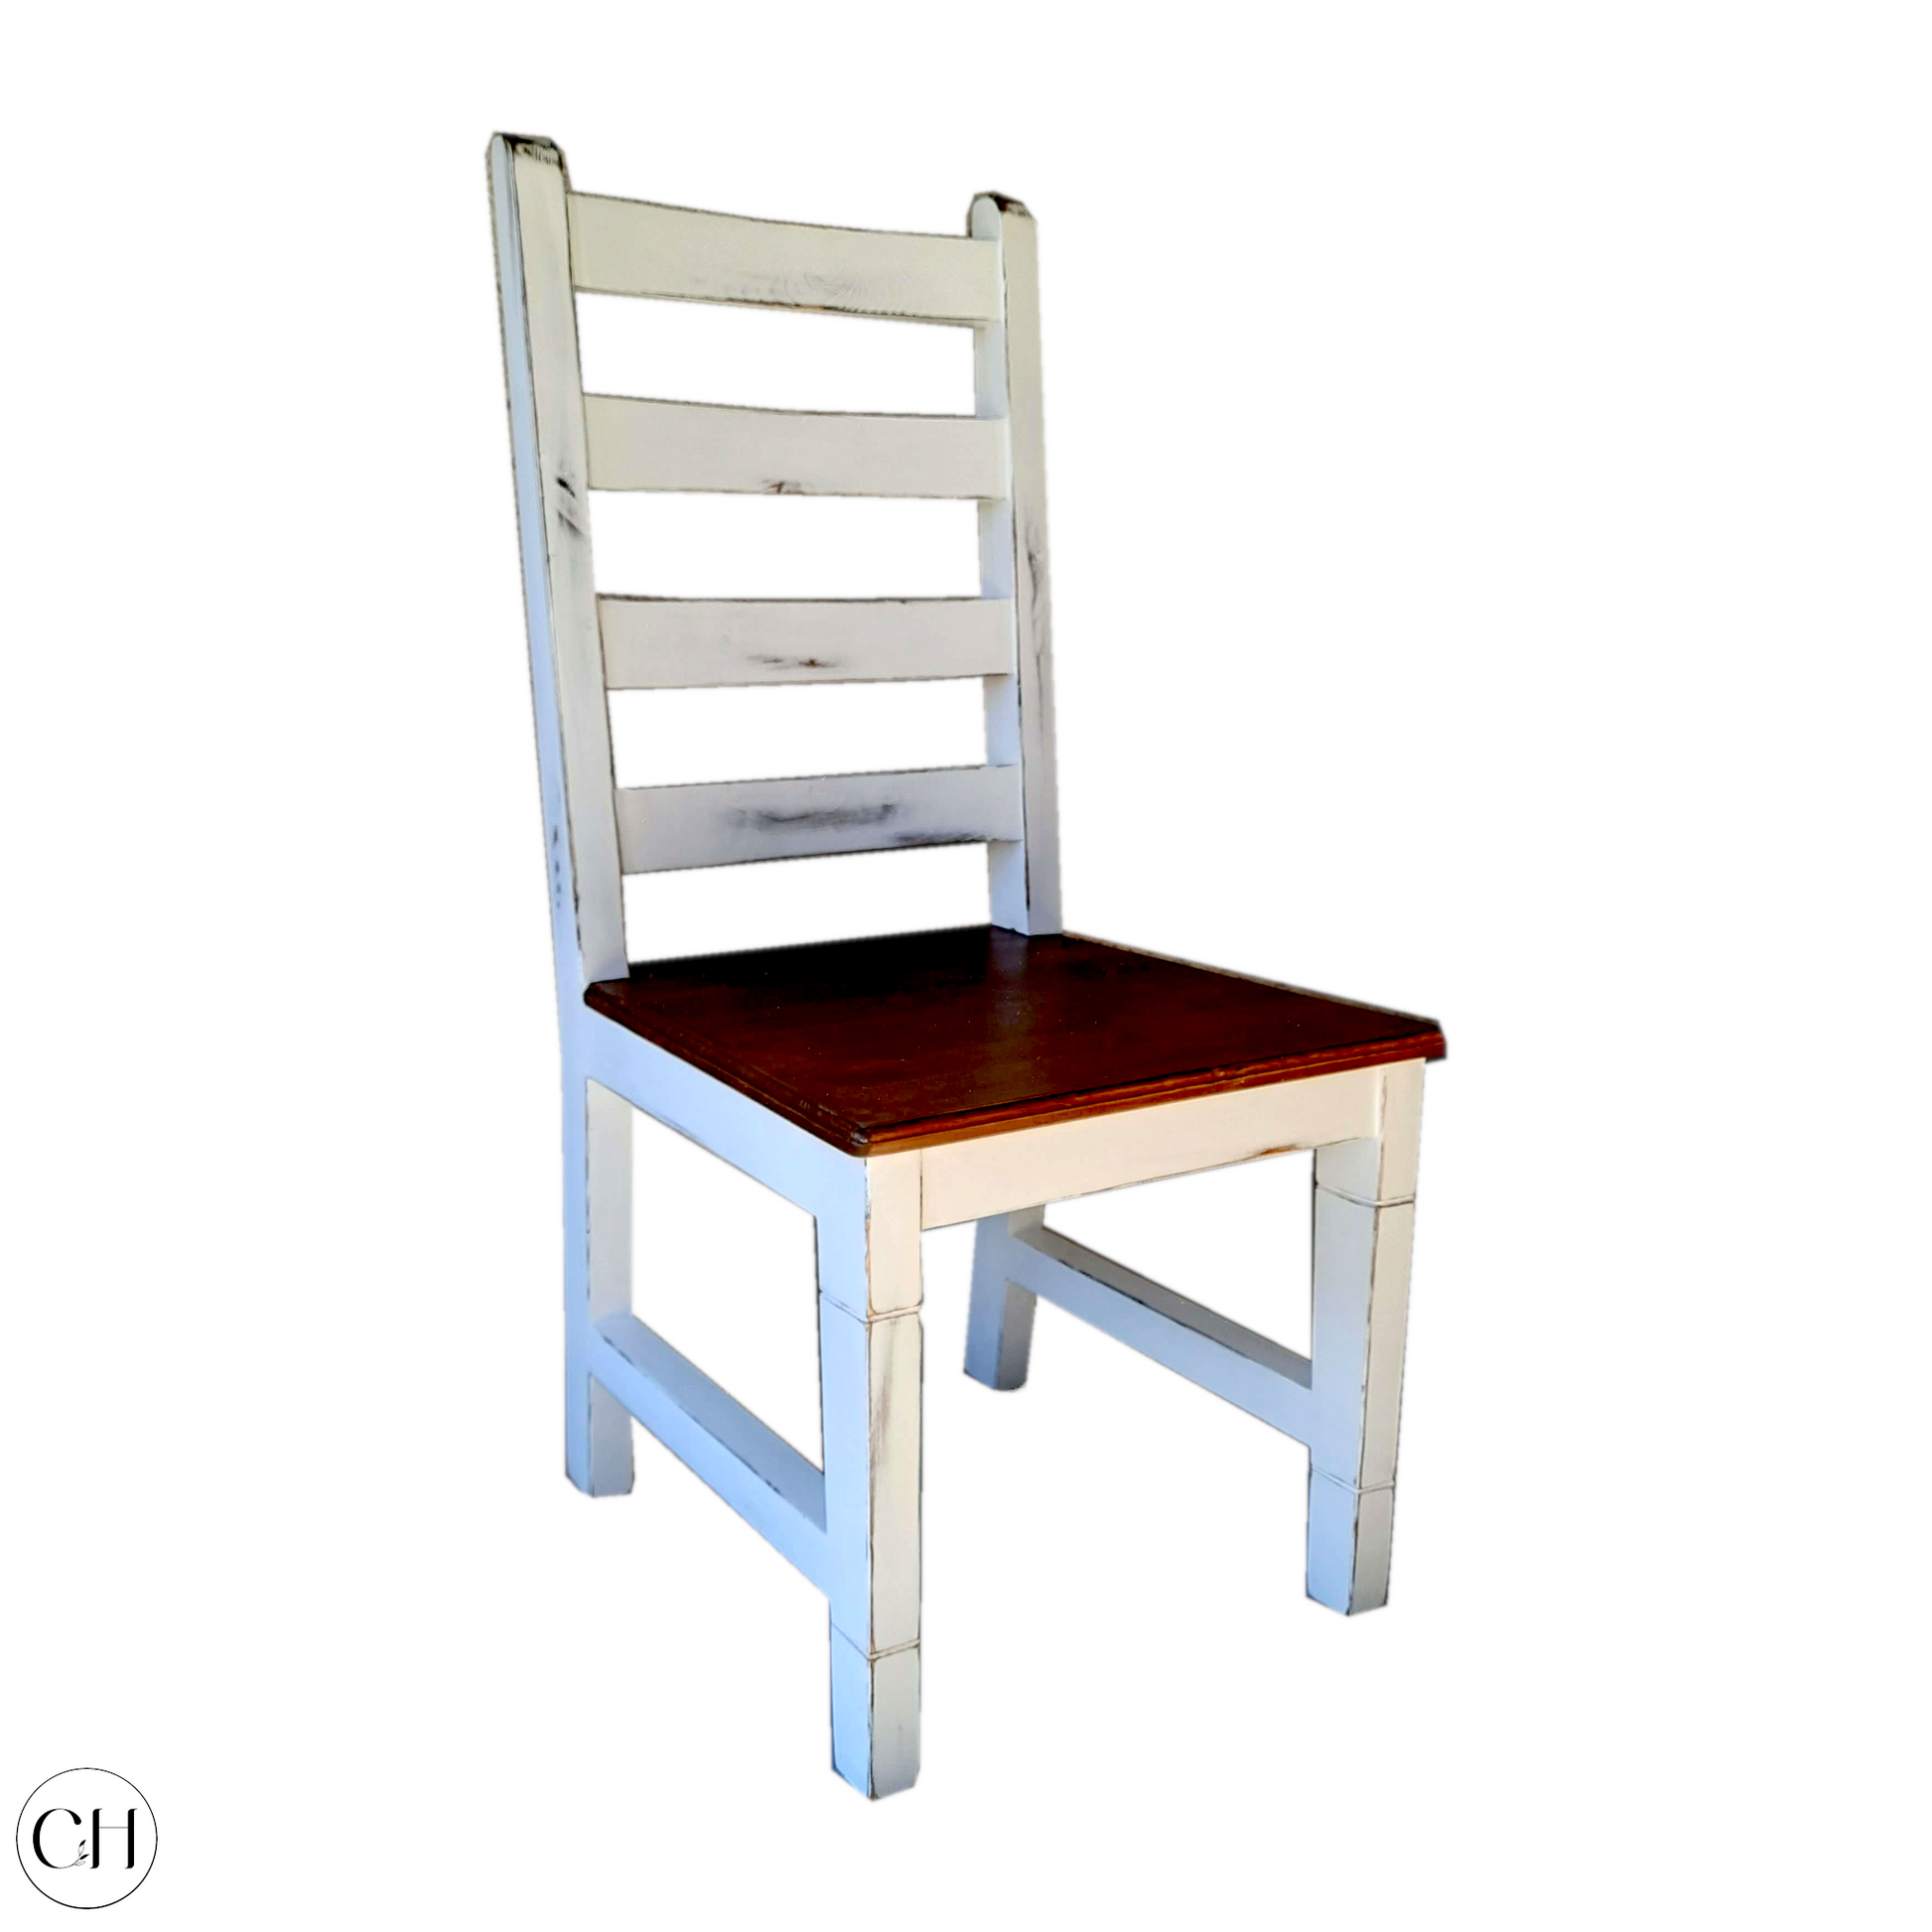 CustHum-Geranium-single dining chair in distressed white and wood finish